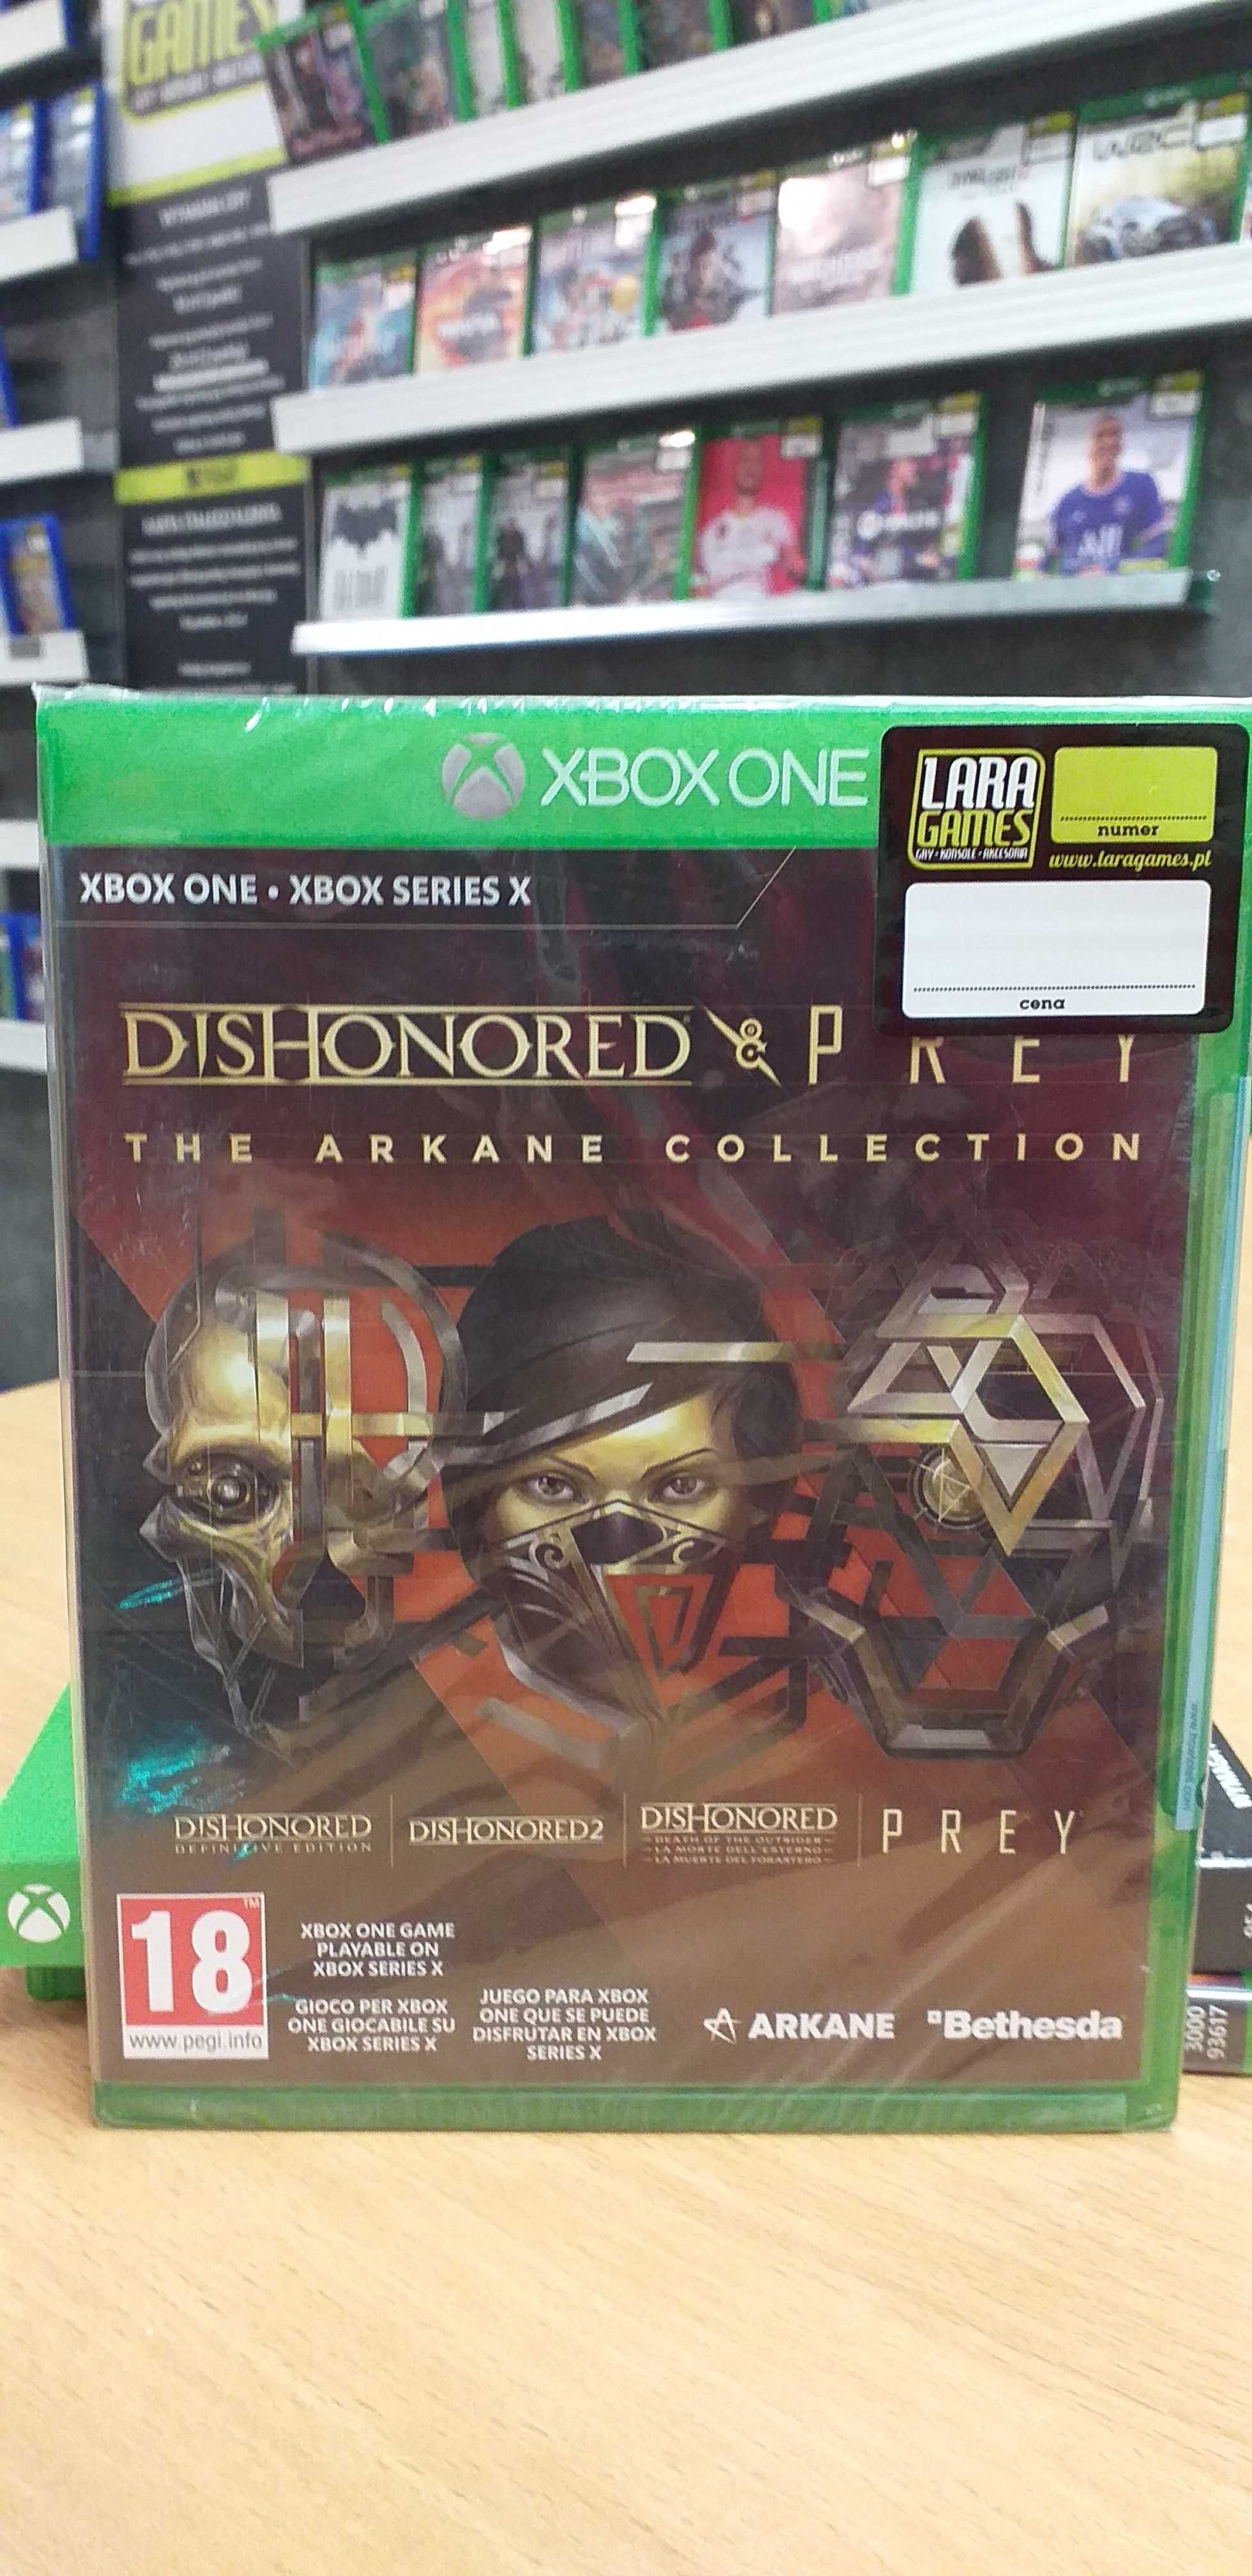 Dishonored and Prey The Arkane Collection XBOX ONE Series X Lara Games